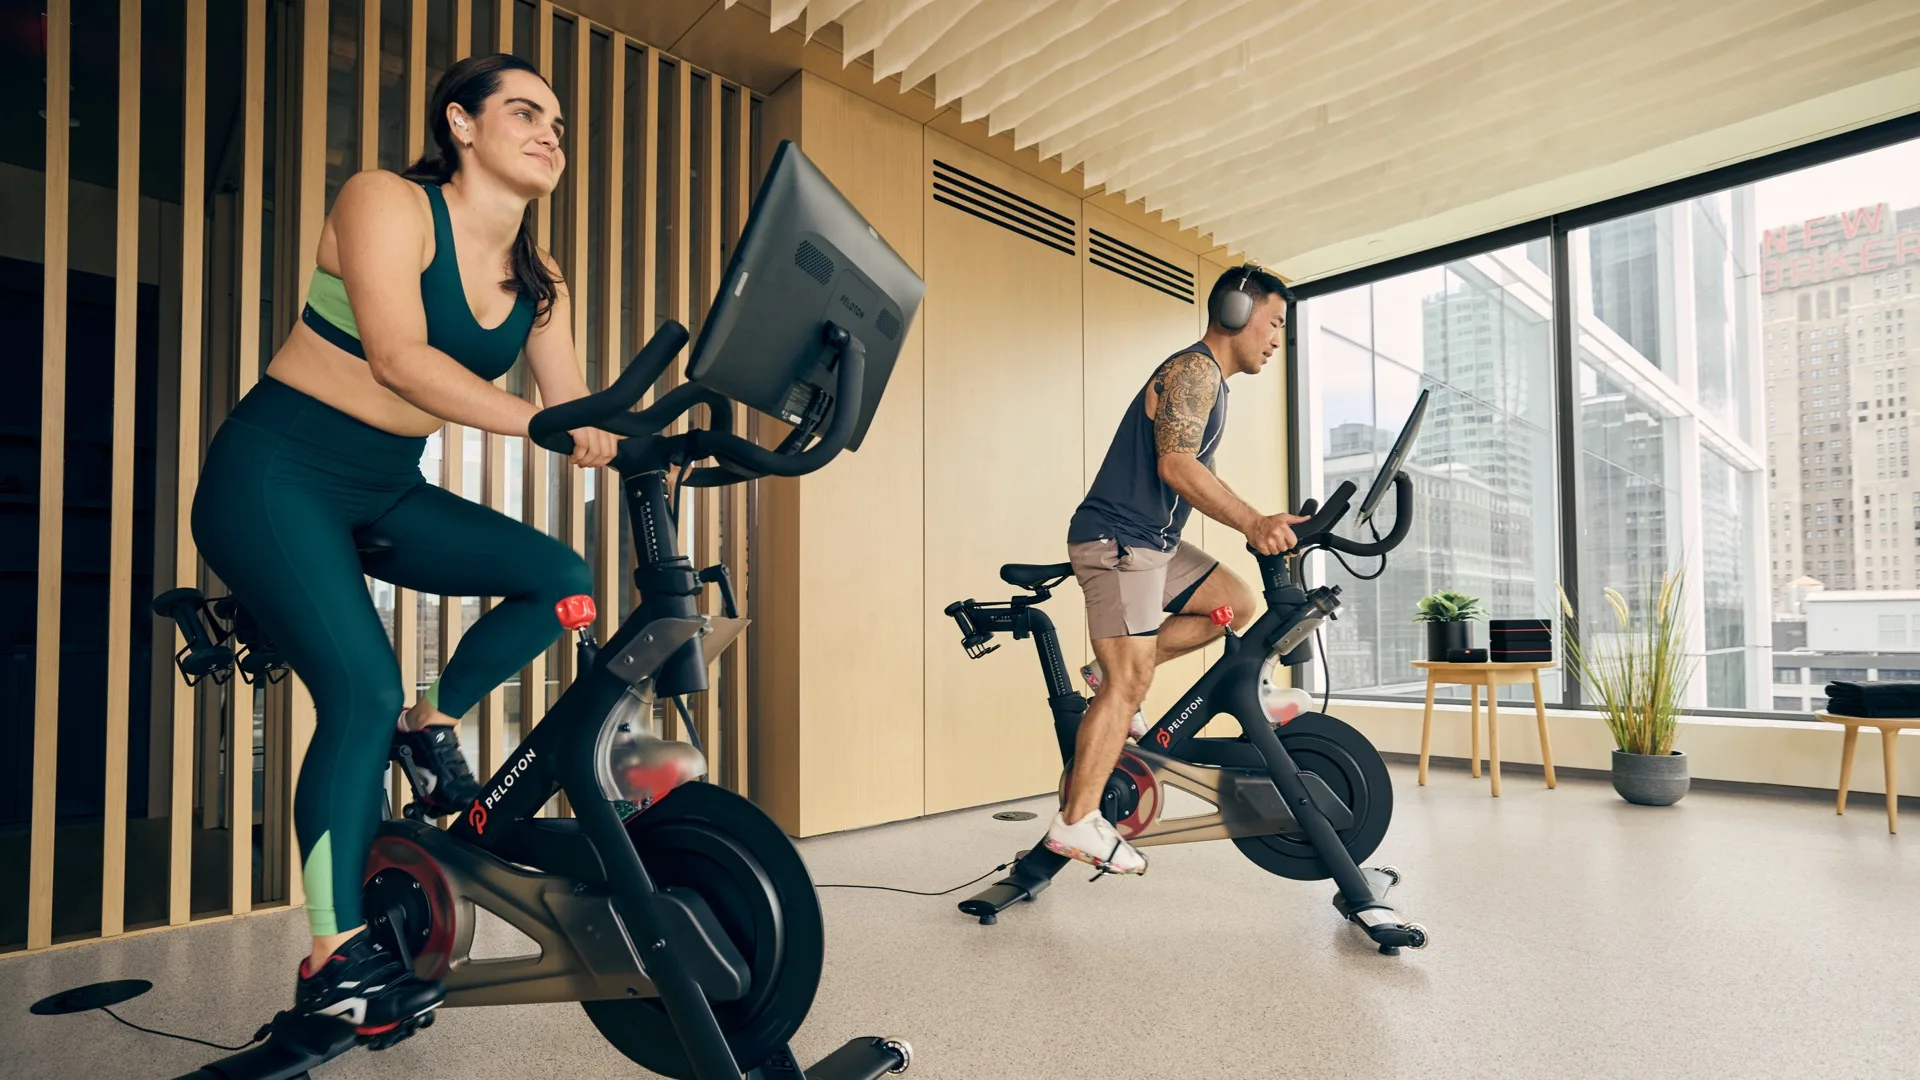 Two exercisers using Peloton stationary bikes